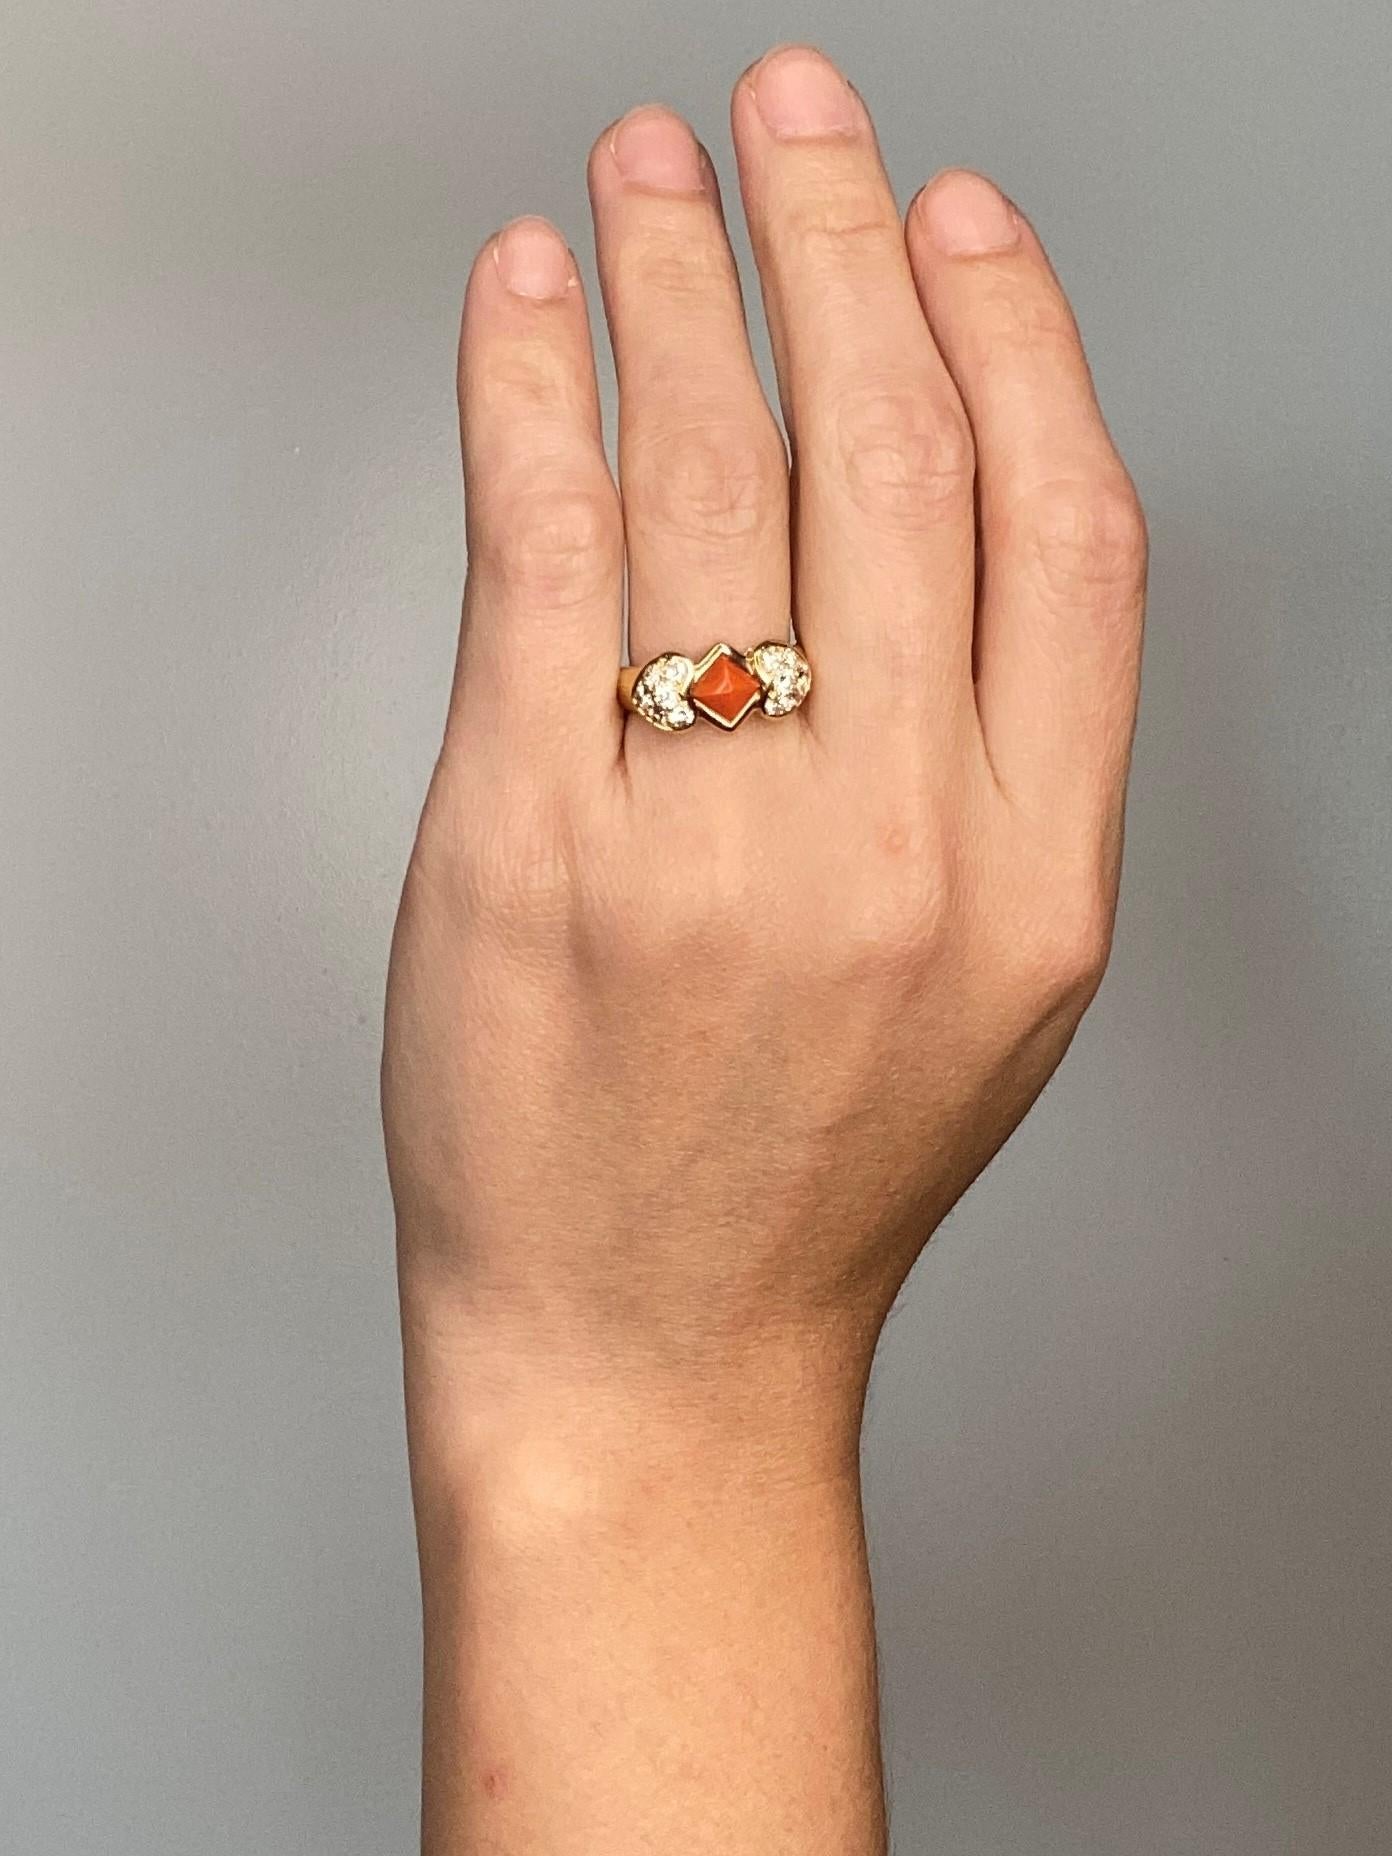 Christian Dior 1970 Paris Ring 18 Karats Gold with 1.96 Ctw Diamonds and Coral For Sale 5